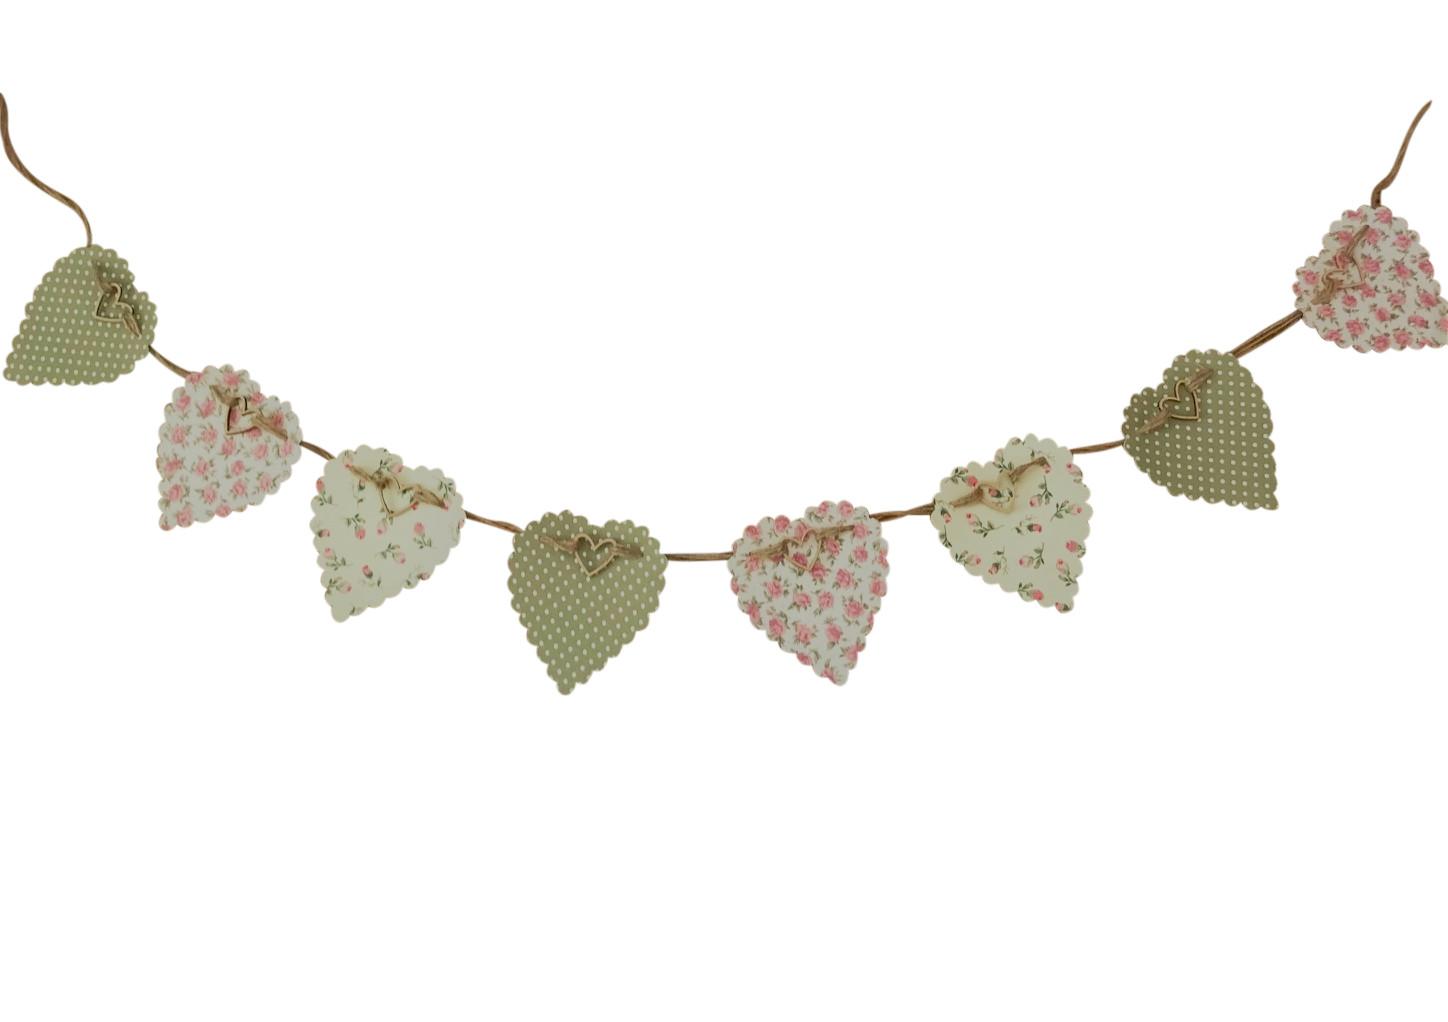 Fabric Bunting,Rigid Hearts,Green and Pink Ditsy Florals and Polka Dots,Vintage Style,100% Cotton,2.5 Metres Long